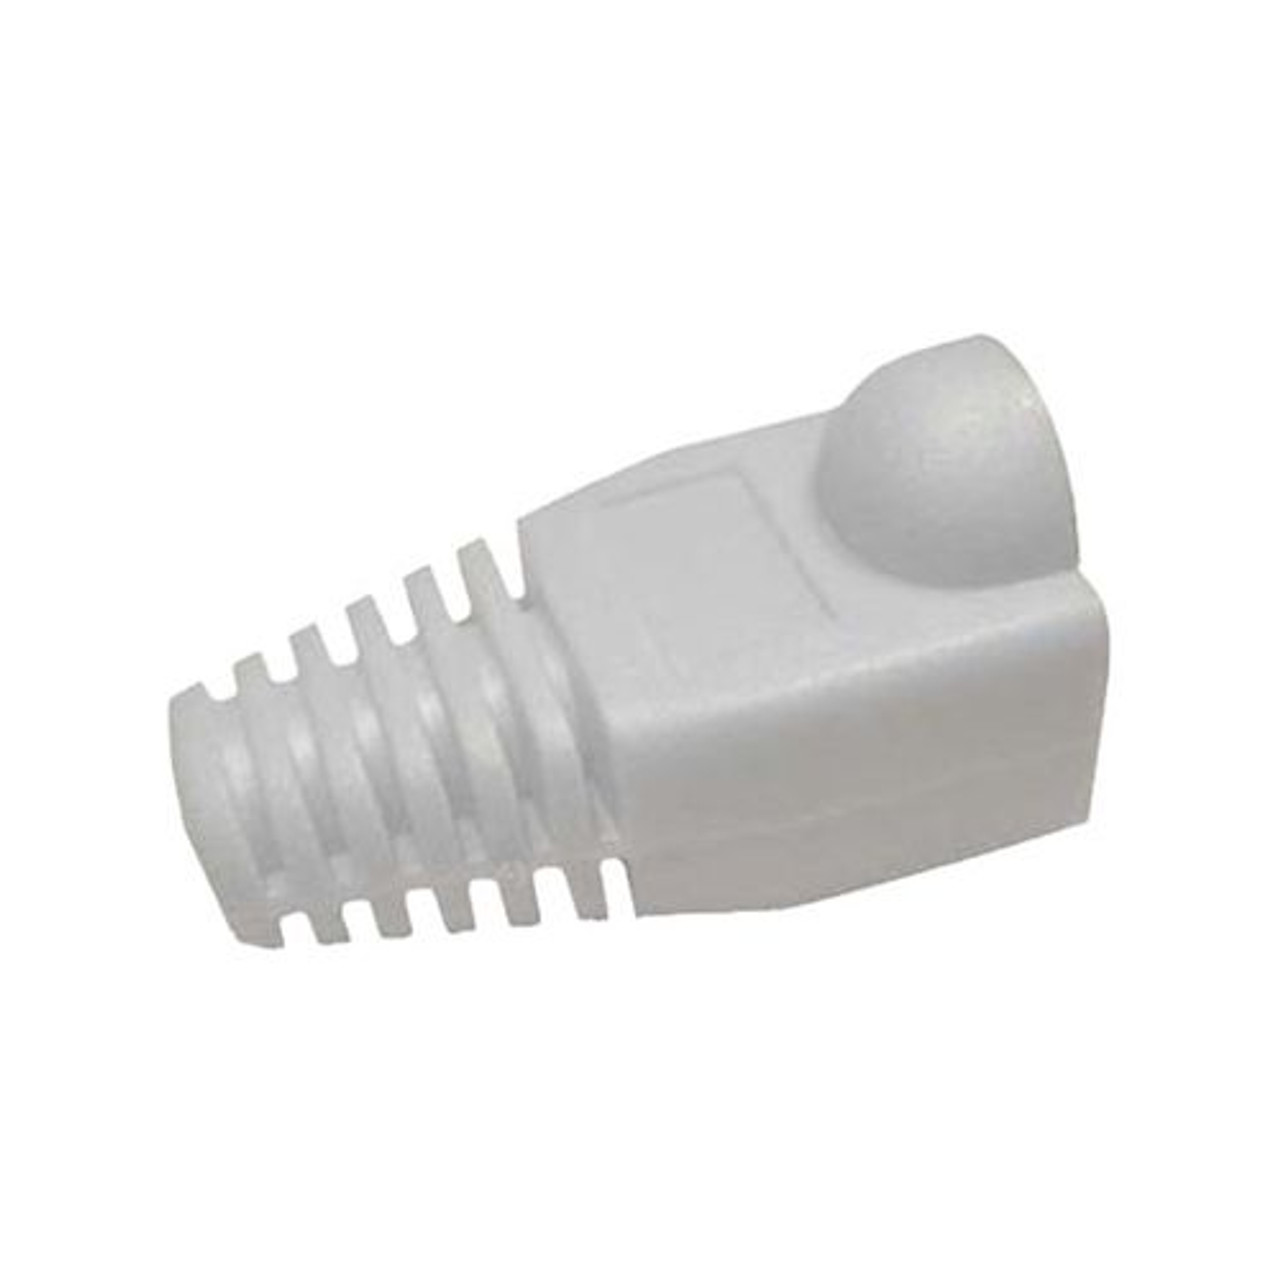 Eagle RJ45 Strain Relief Snagless Boot White Slide-On RJ-45 Boot Connector Covers, Round UTP Cable Snag-Less Boot Covers for Strain Relief and Plug Tab Protection, Sold as 50 Pack, Part # A080W5